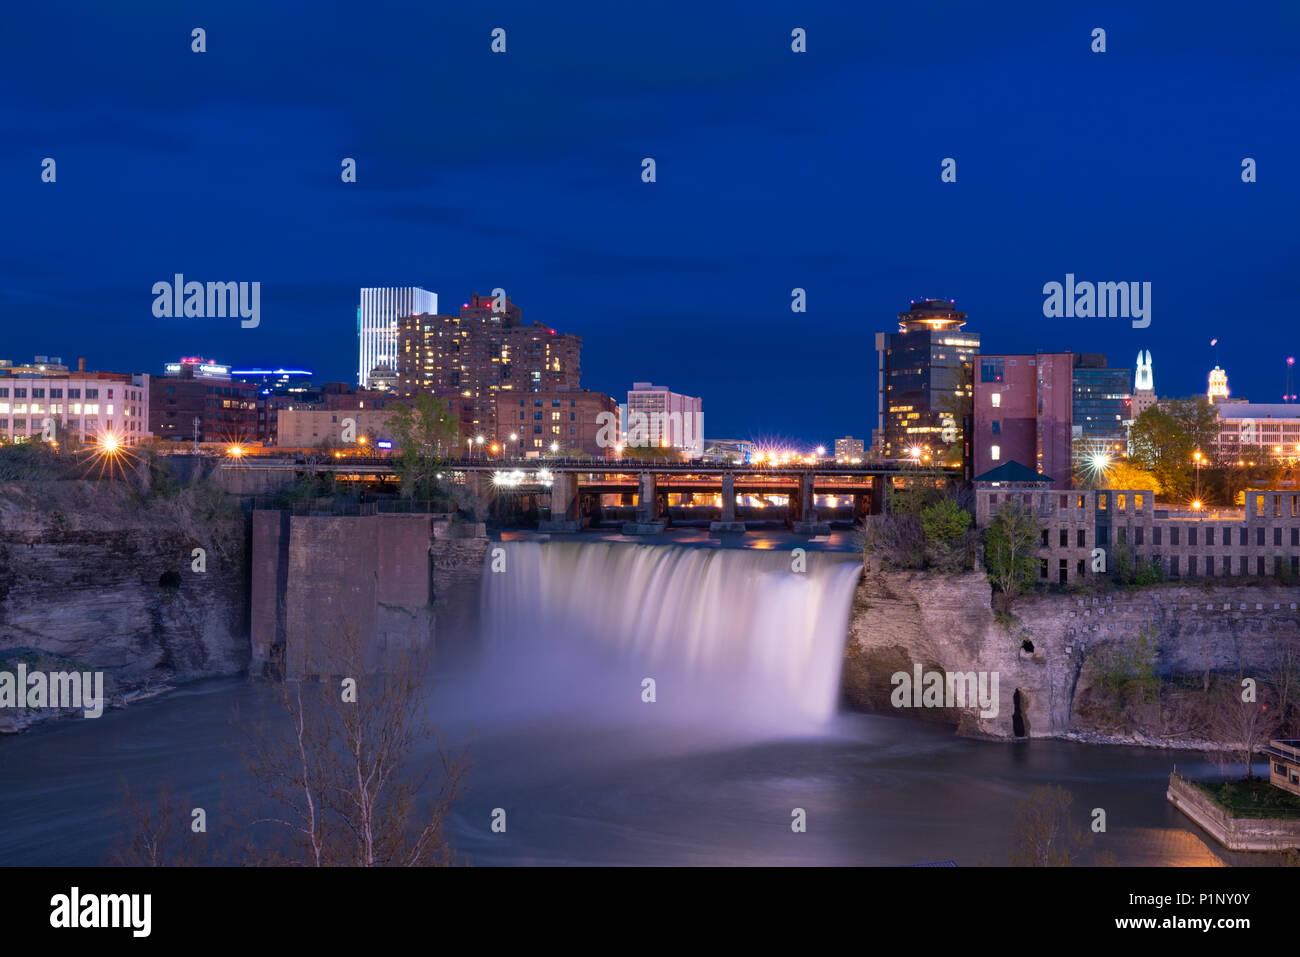 ROCHESTER, NY - MAY 14, 2018: Skyline of Rochester, New York at the High Falls along the Genesee River at night Stock Photo